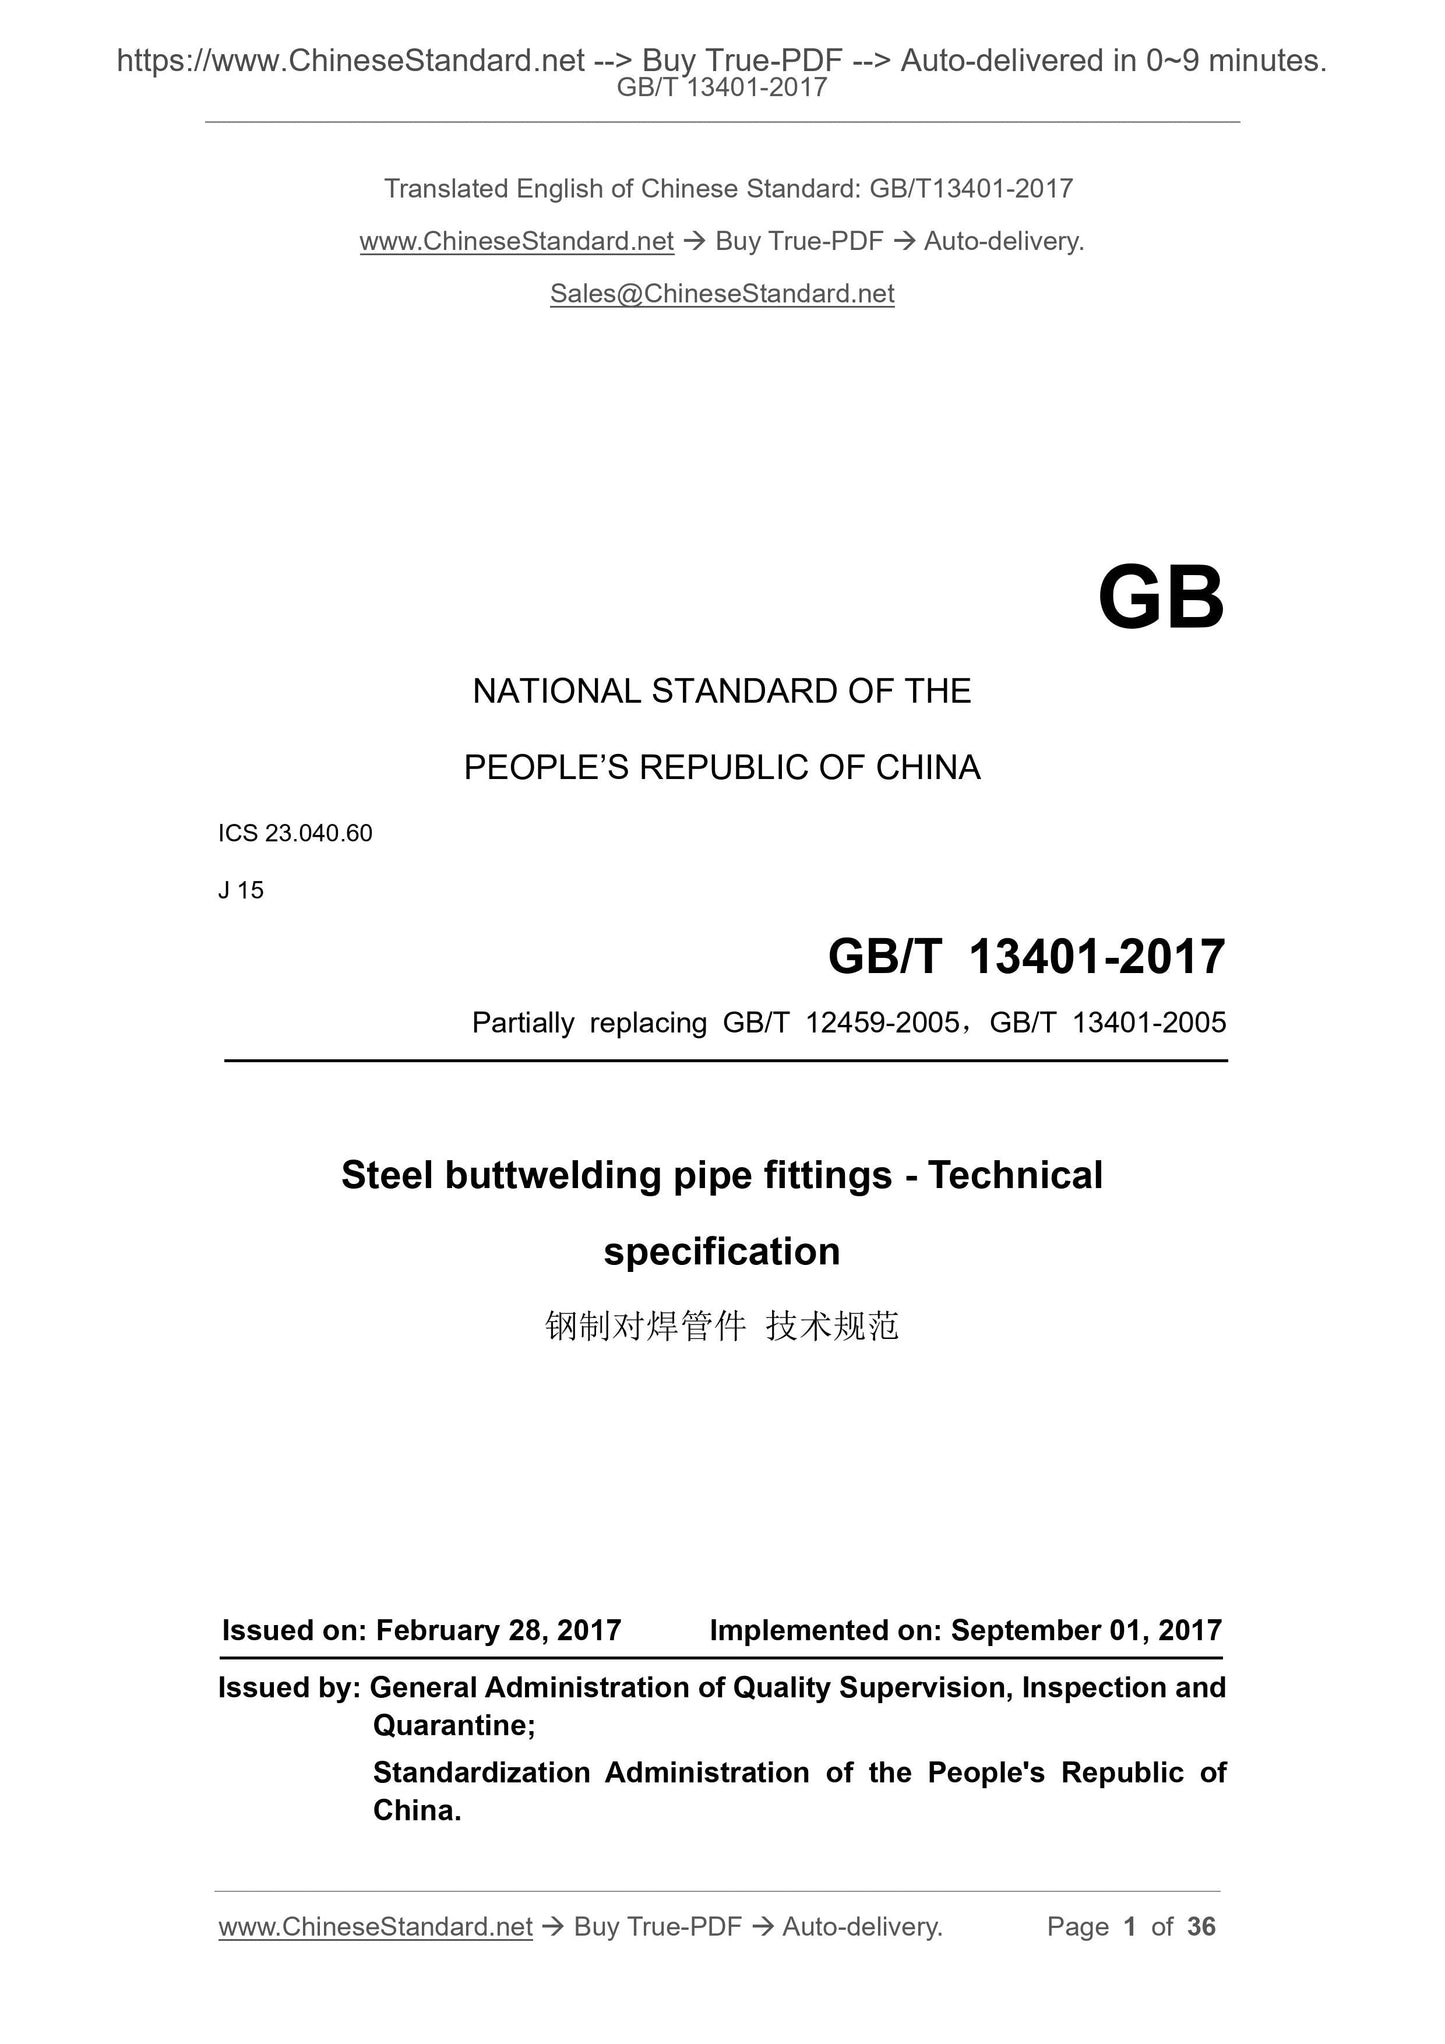 GB/T 13401-2017 Page 1